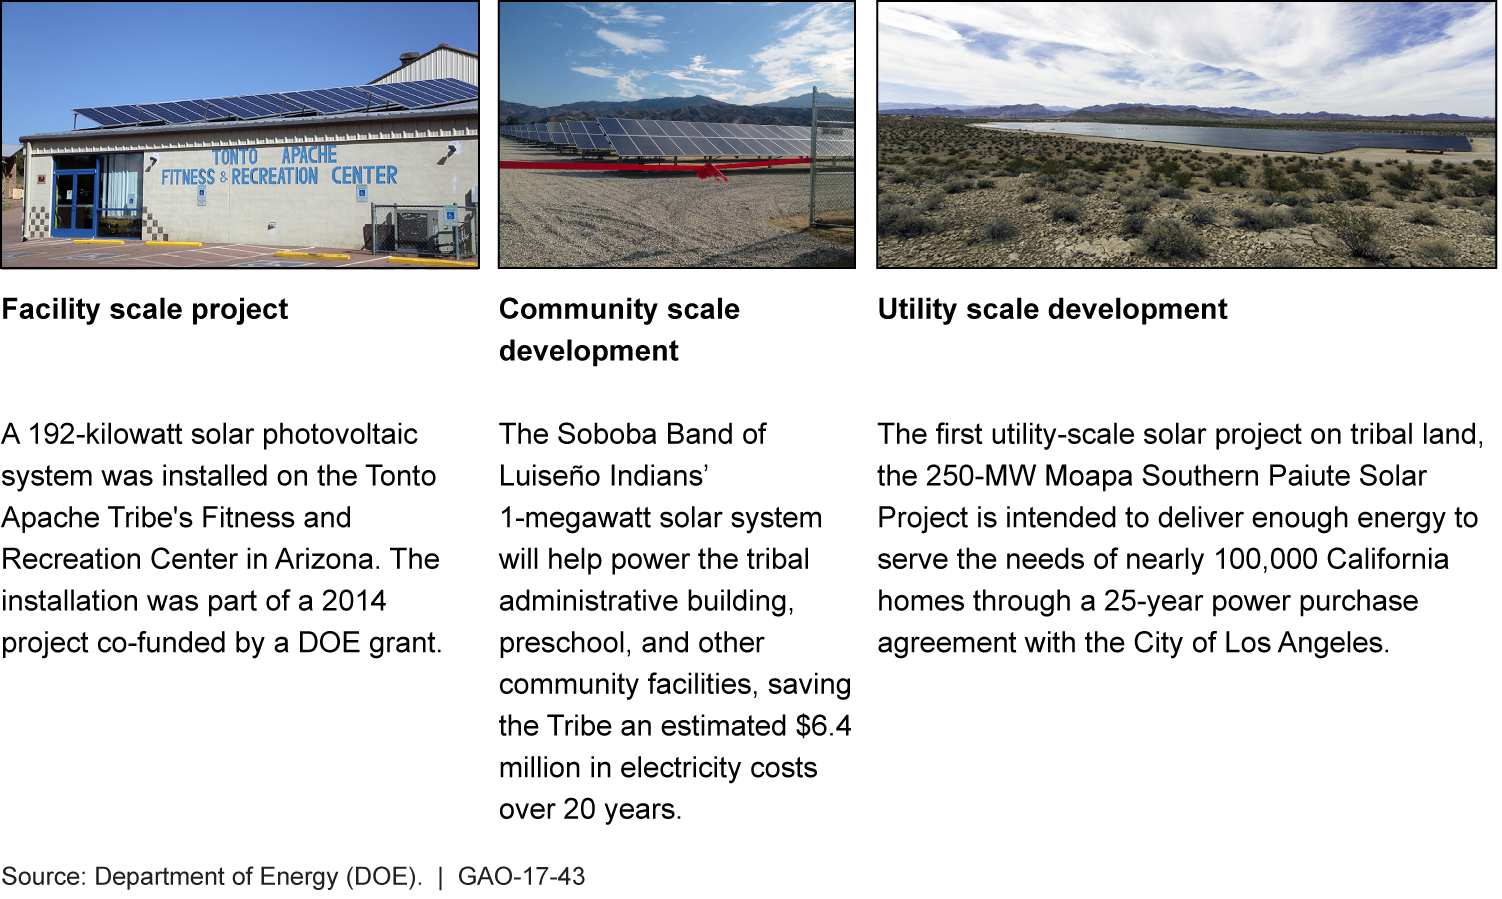 3 photos solar projects on tribal lands, 1 on the roof of a recreation center, the others in fields 